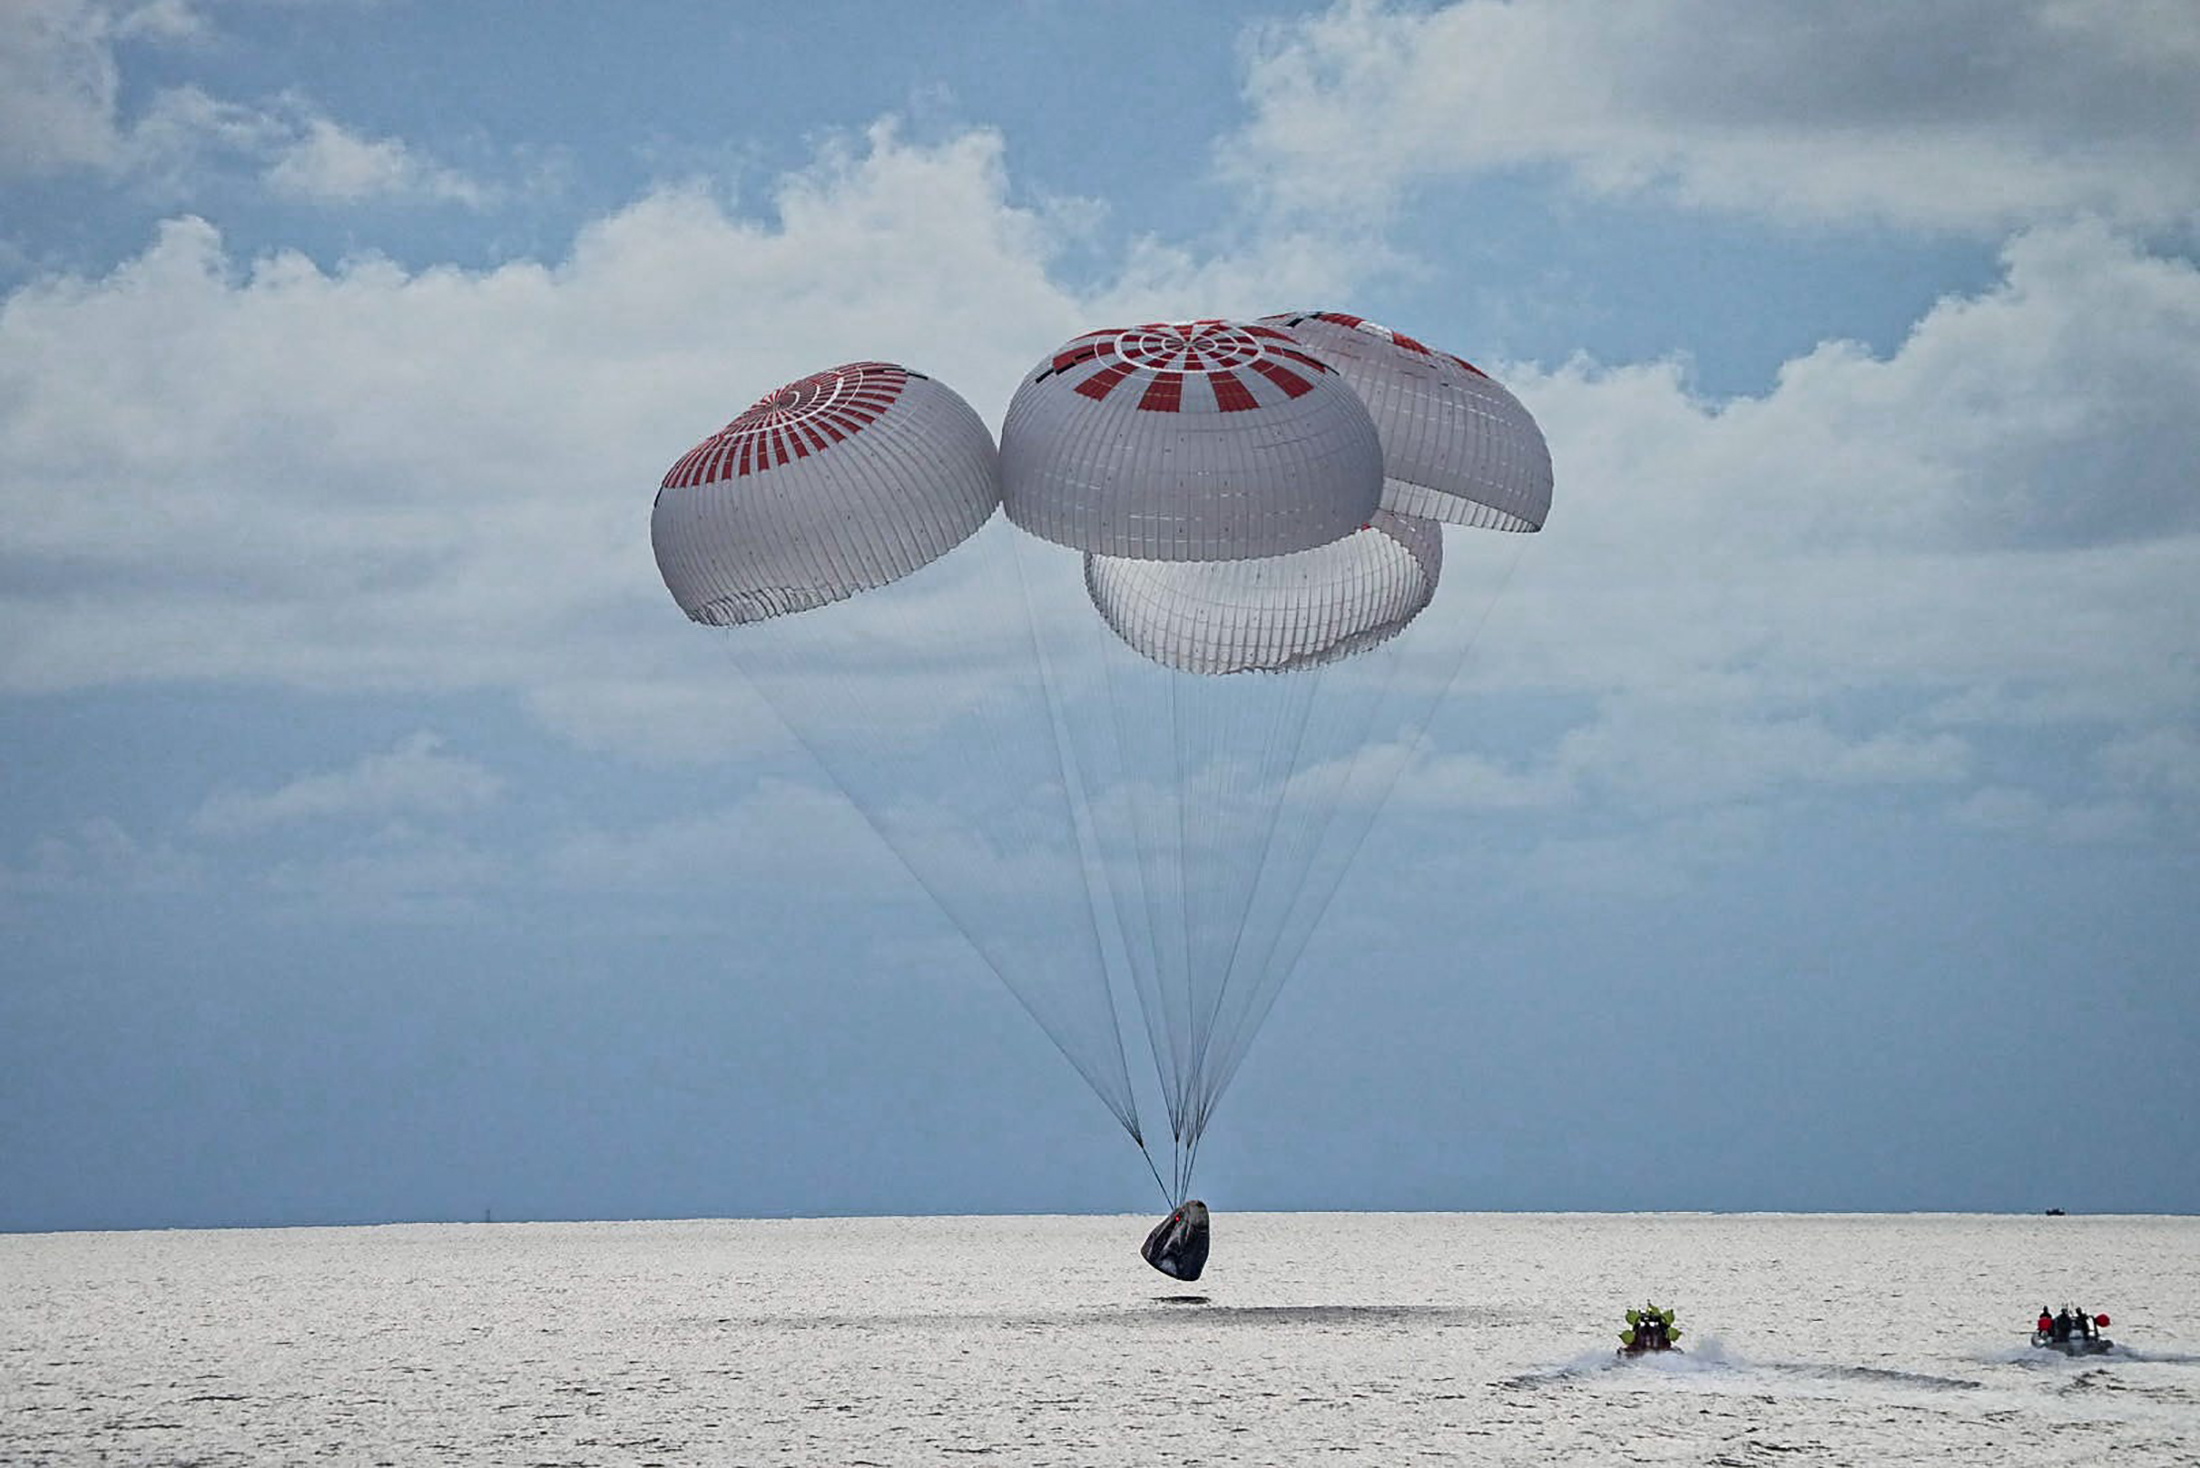 SpaceX Inspiration4 mission safely splashes down in SpaceX's Crew Dragon capsule off the coast of Kennedy Space Center